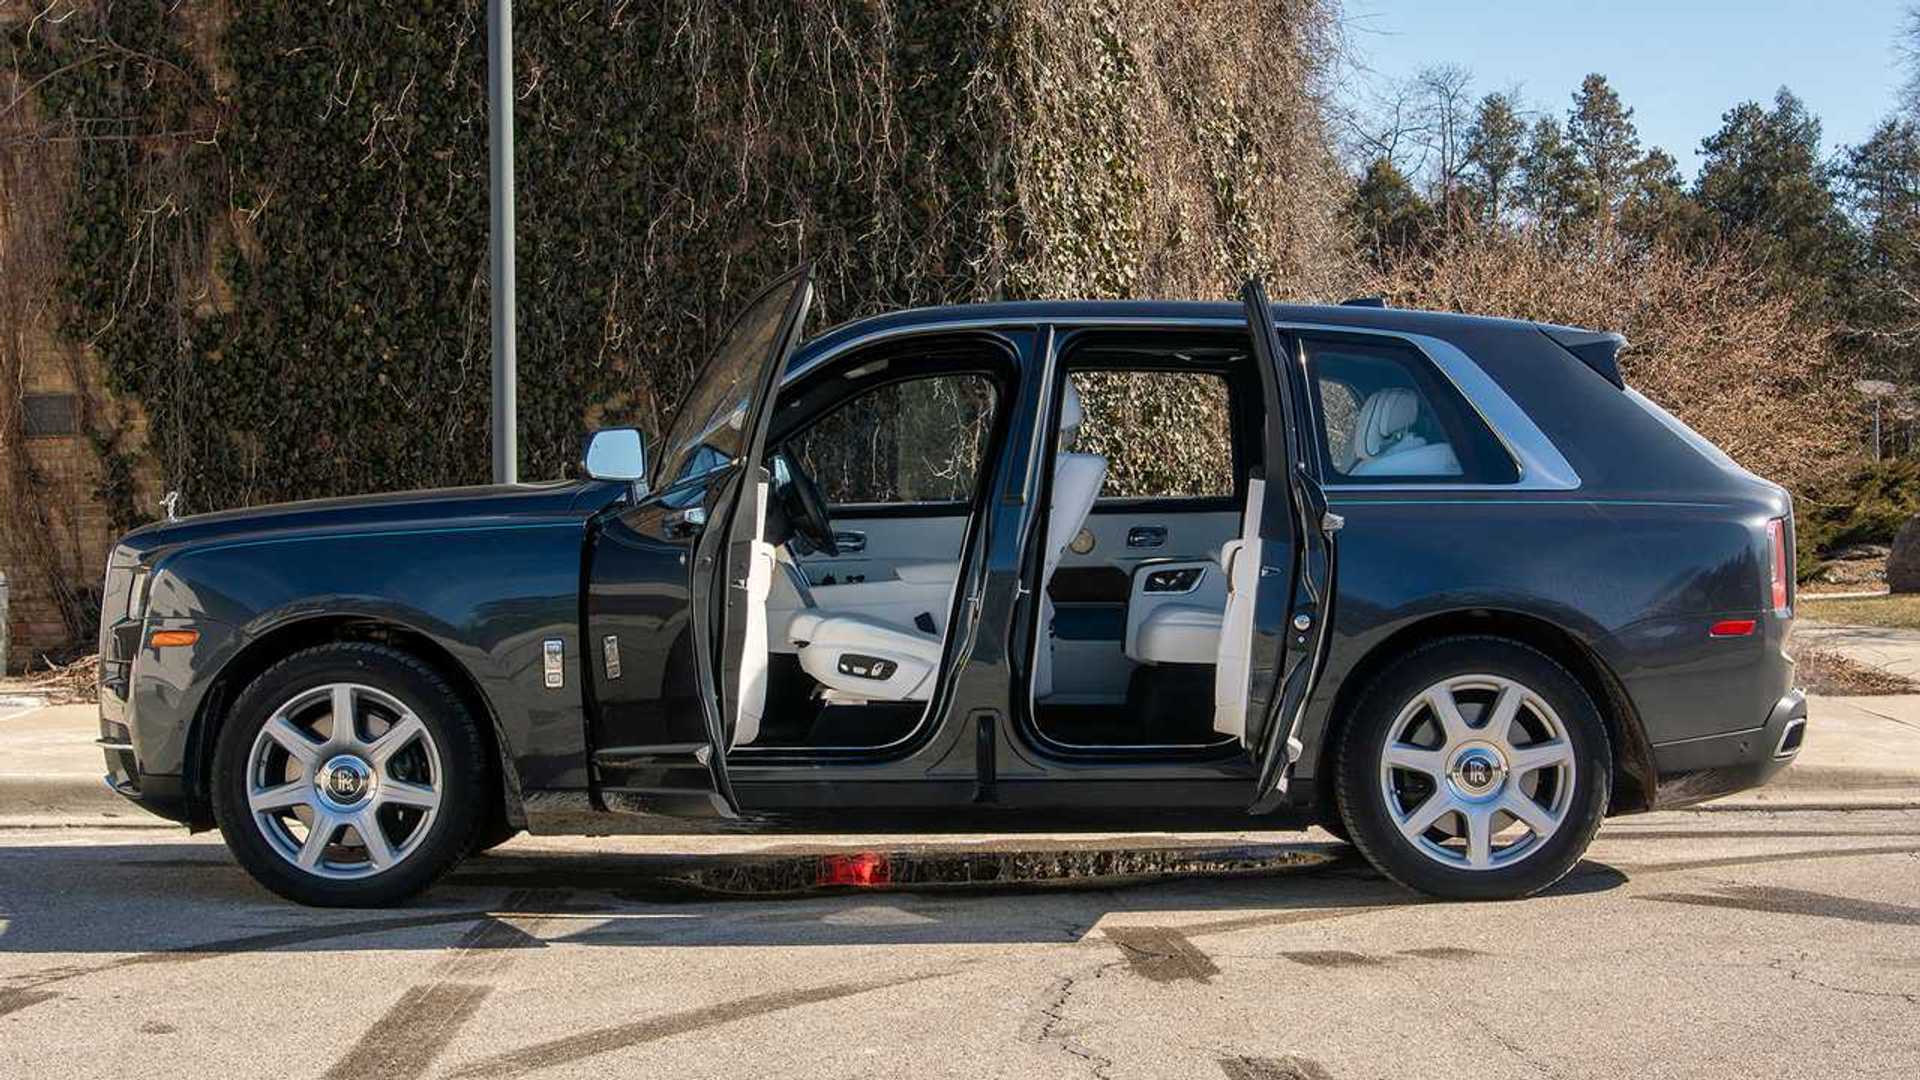 2019 Rolls-Royce Cullinan Review: High On Ecstasy